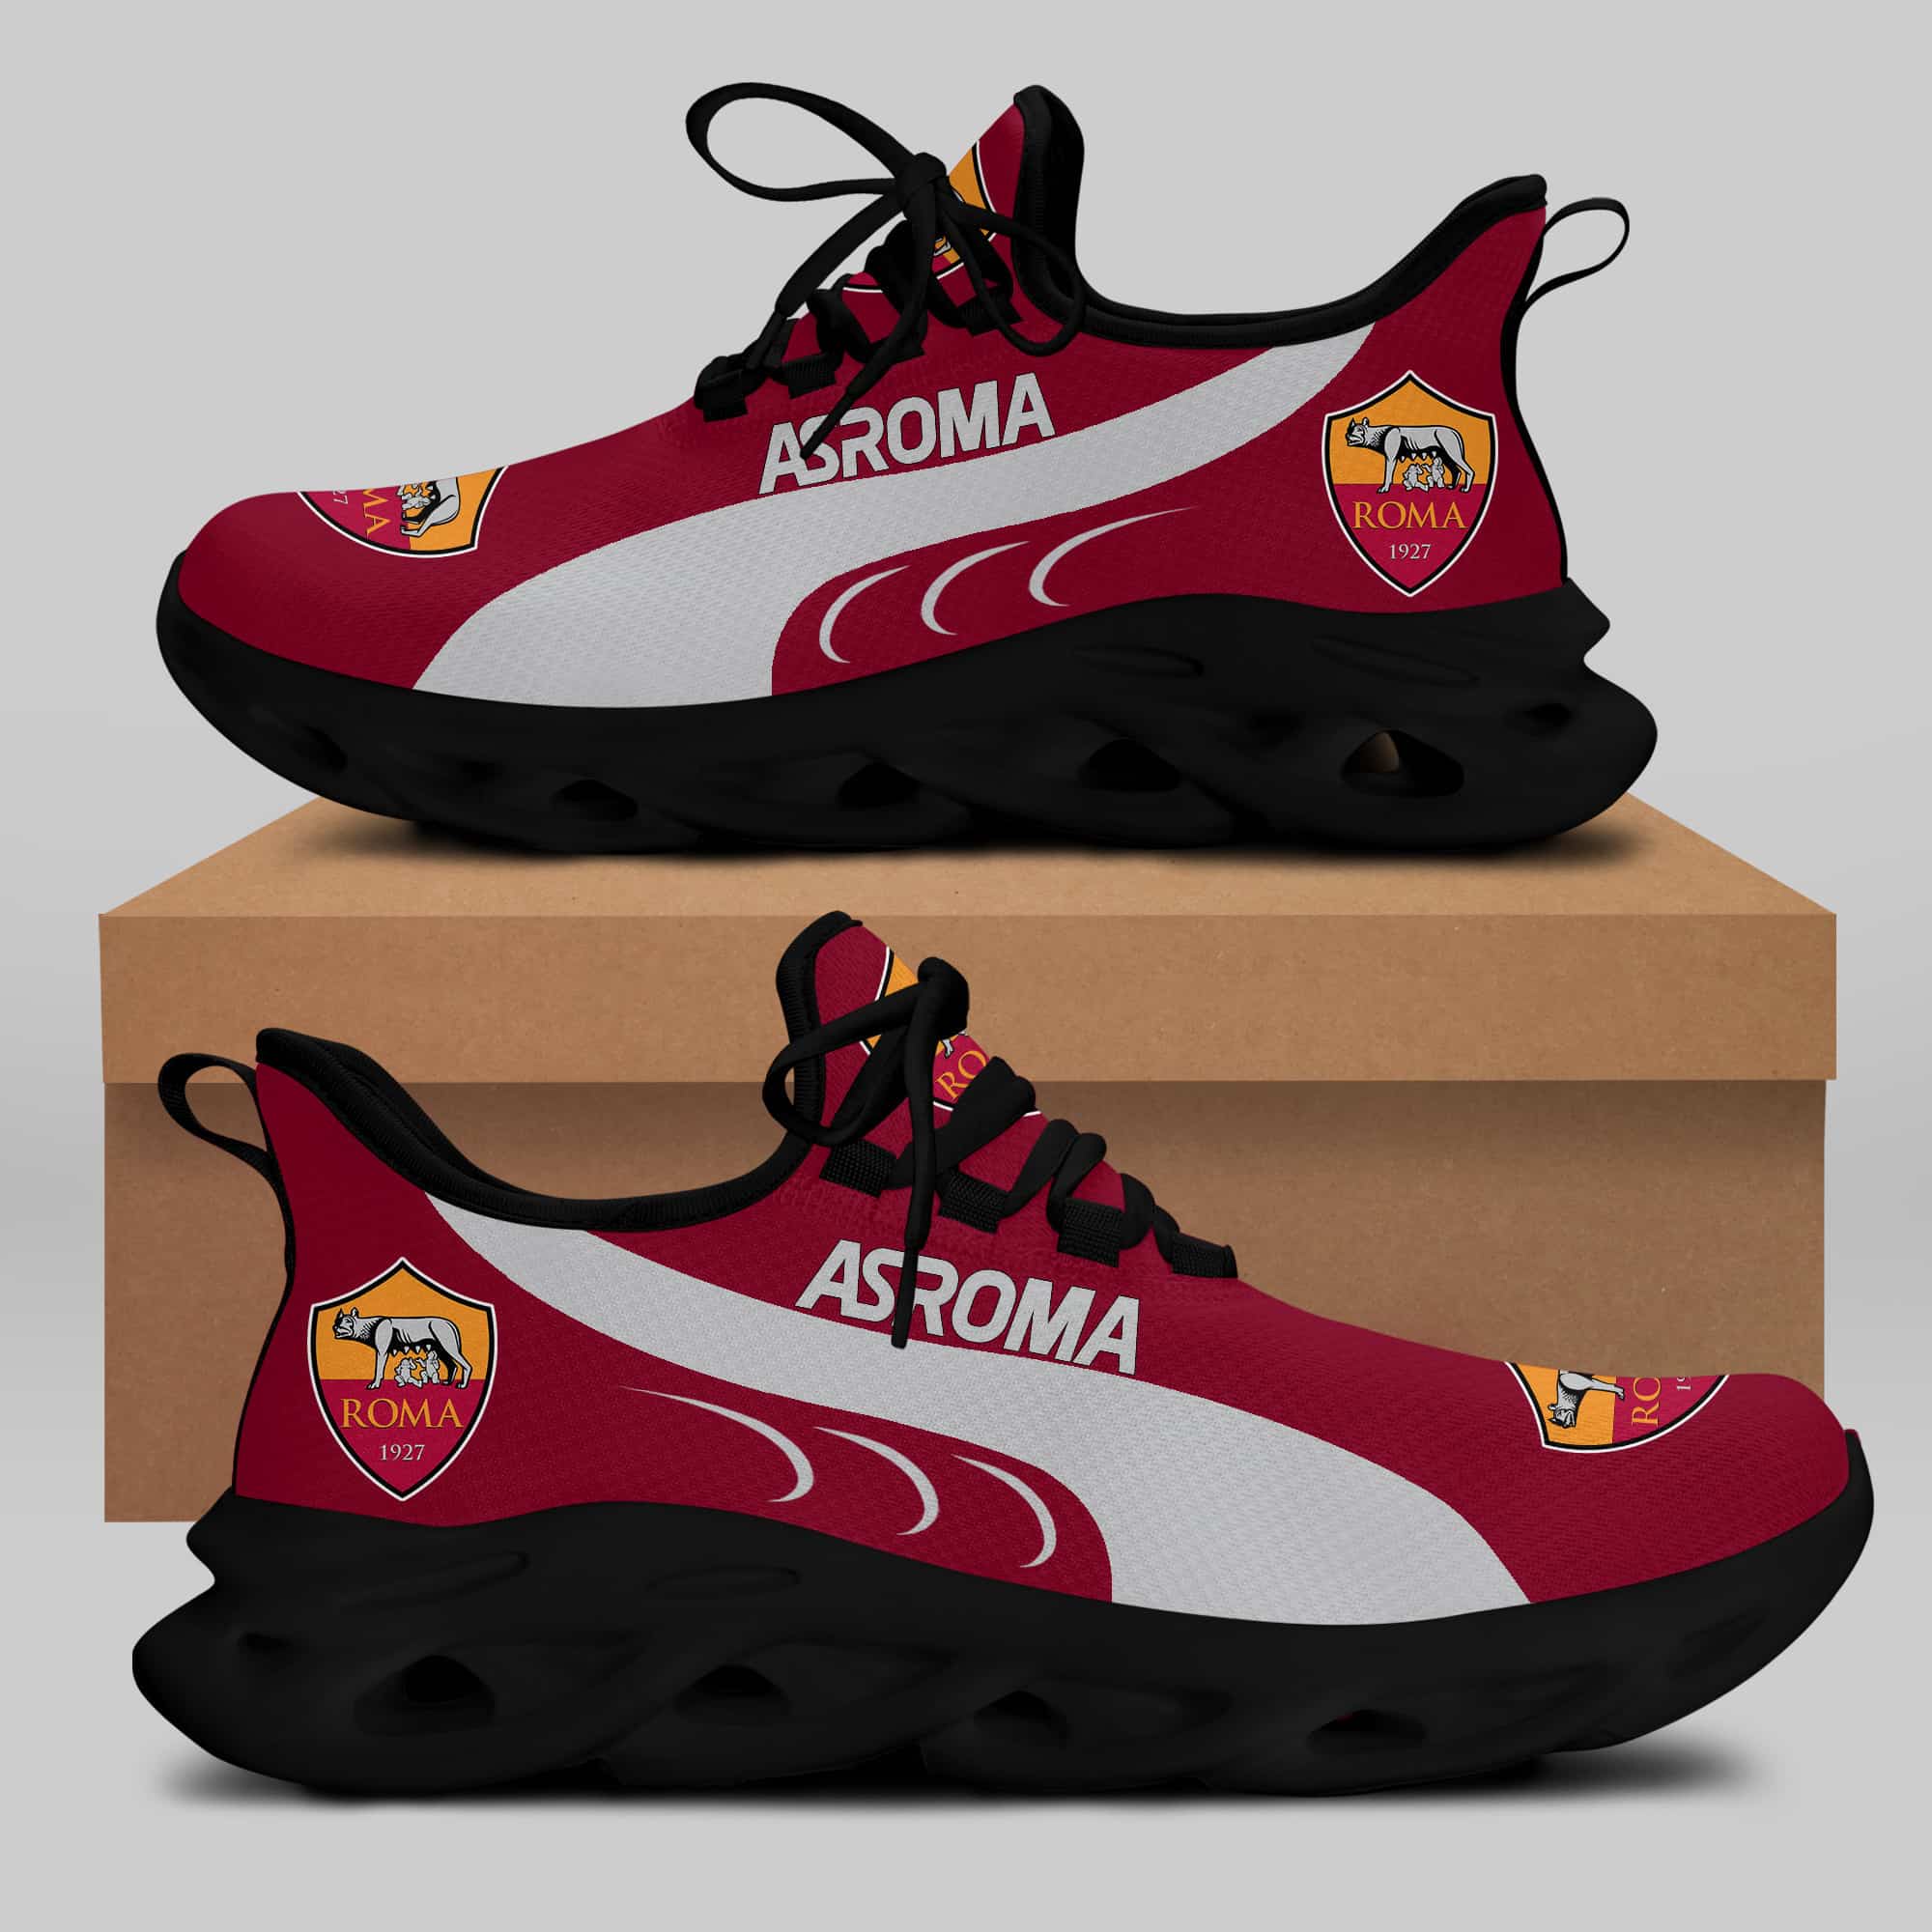 As Roma Running Shoes Max Soul Shoes Sneakers Ver 5 2